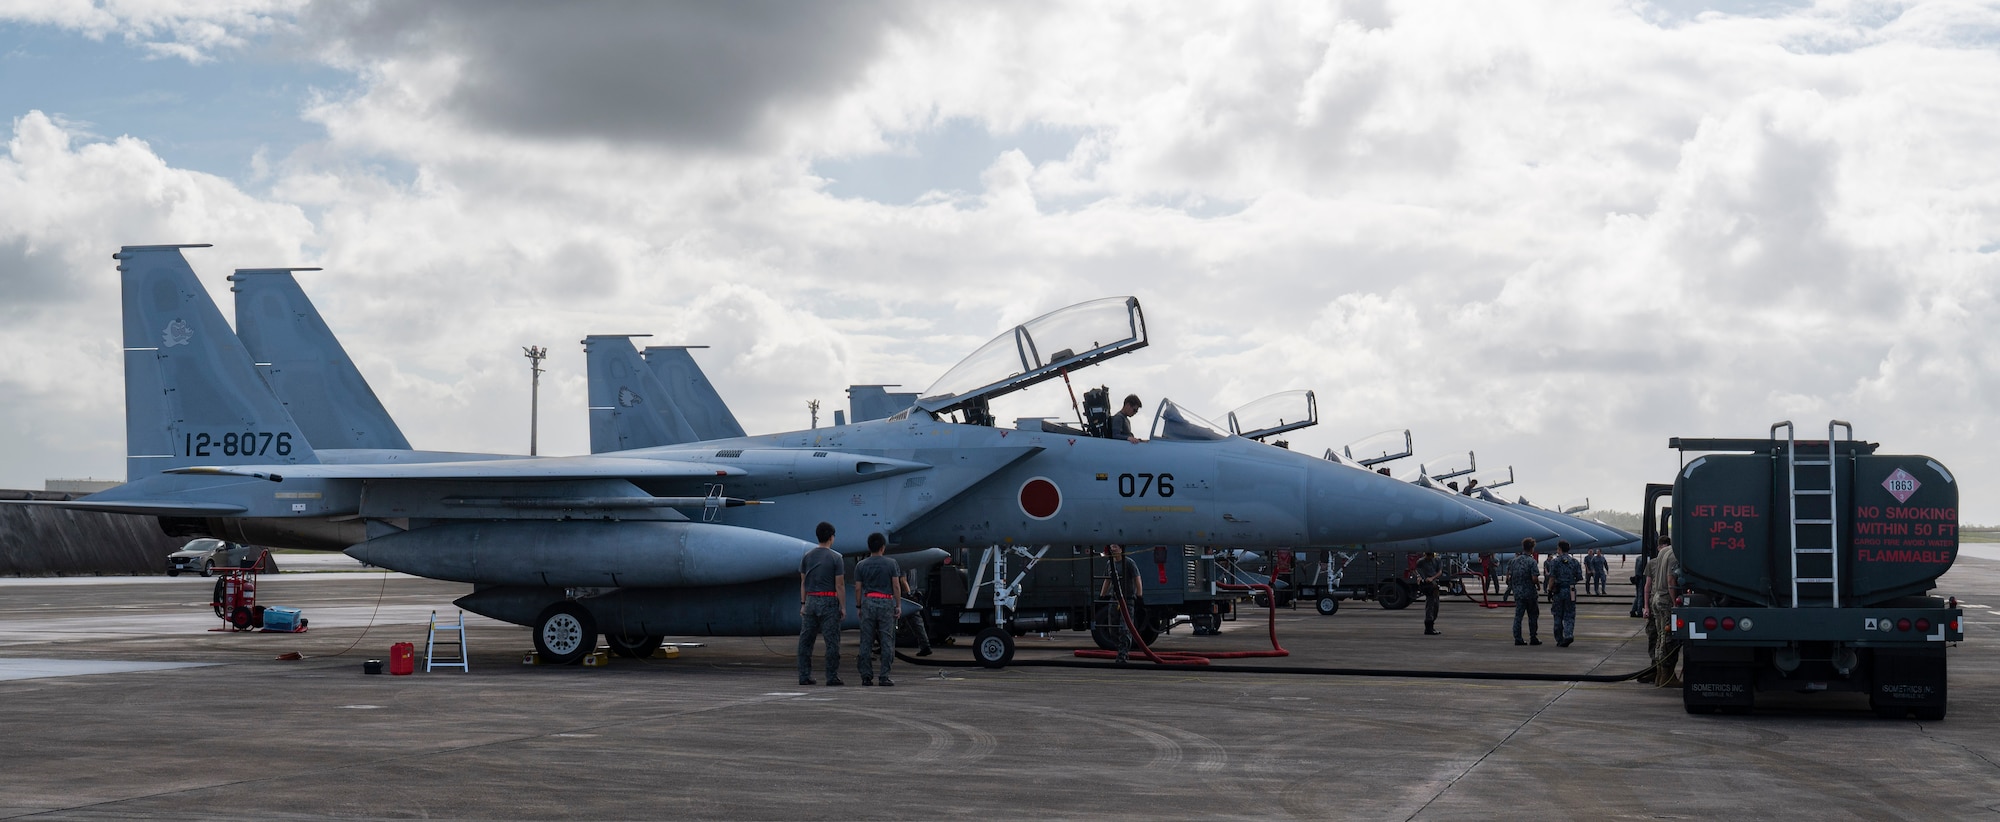 Members of the Japan Air Self-Defense Force and U.S. Air Force work on F15J Eagles during Cope North 24 on Andersen Air Force Base, Guam, Jan. 29, 2024. Cope North enhances U.S. relationships and interoperability with our regional Allies and partners by providing the opportunity to exchange information and improve shared tactics to better integrate multilateral defense capabilities. (U.S. Air Force photo by Airman 1st Class Spencer Perkins)